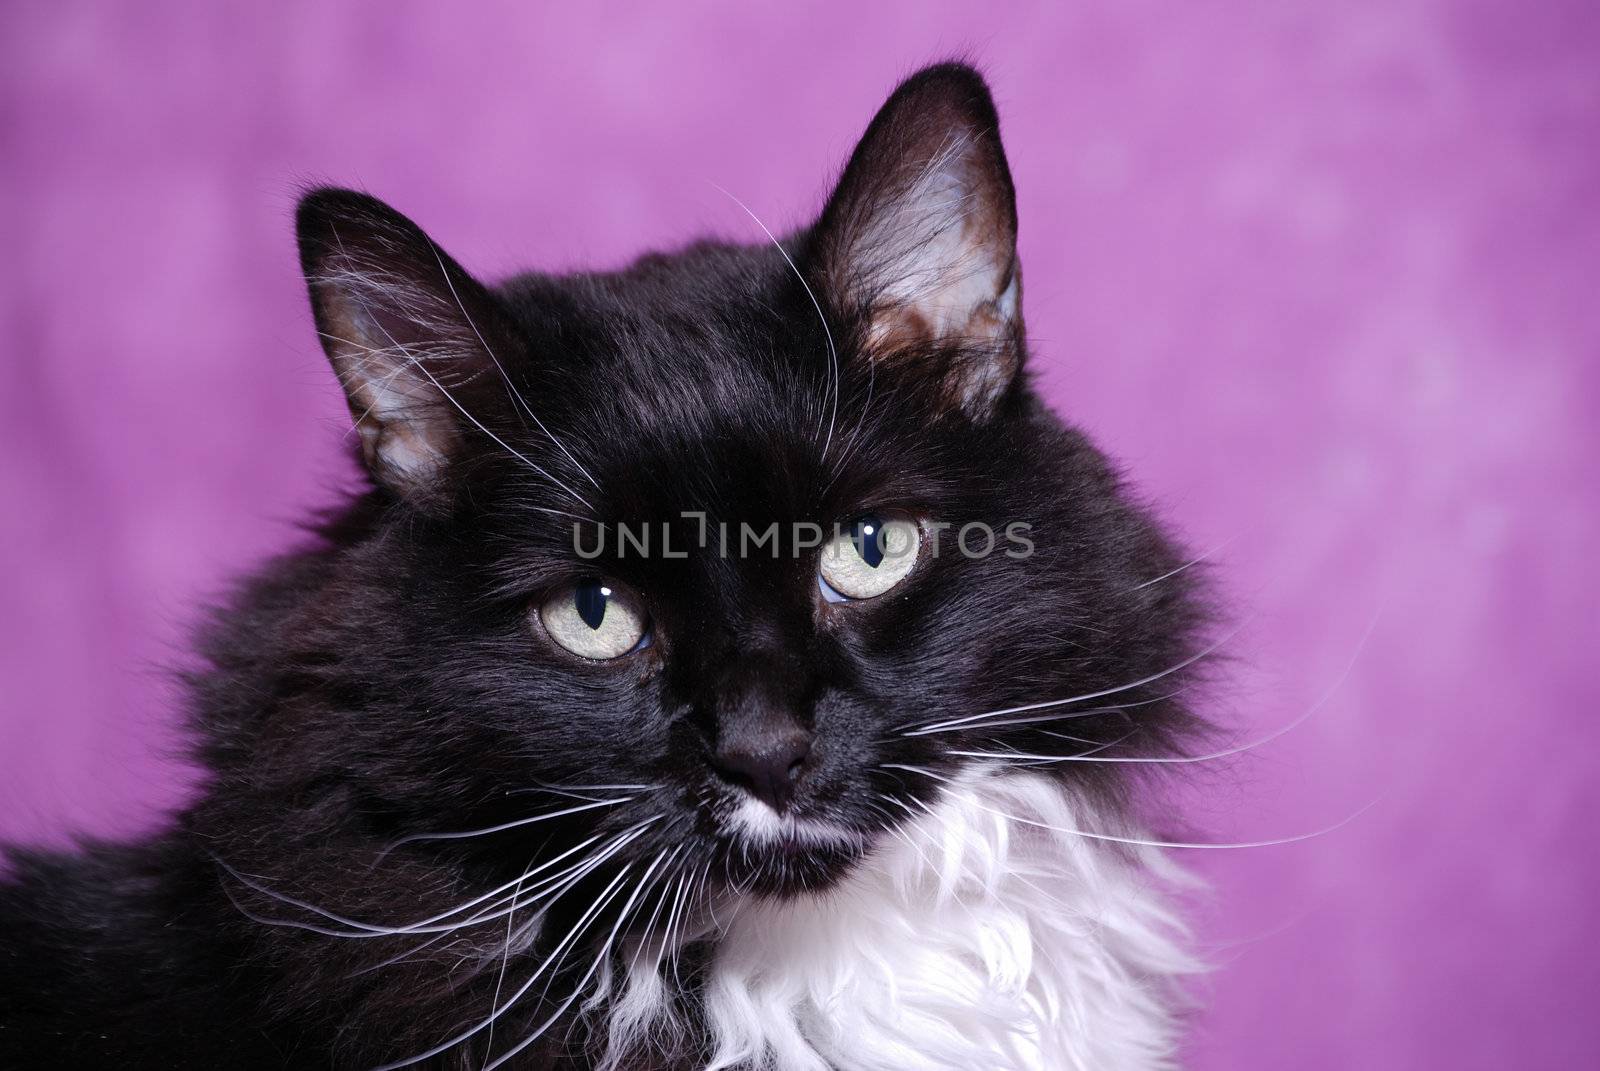 Black and White Cat on Purple Background by Eponaleah